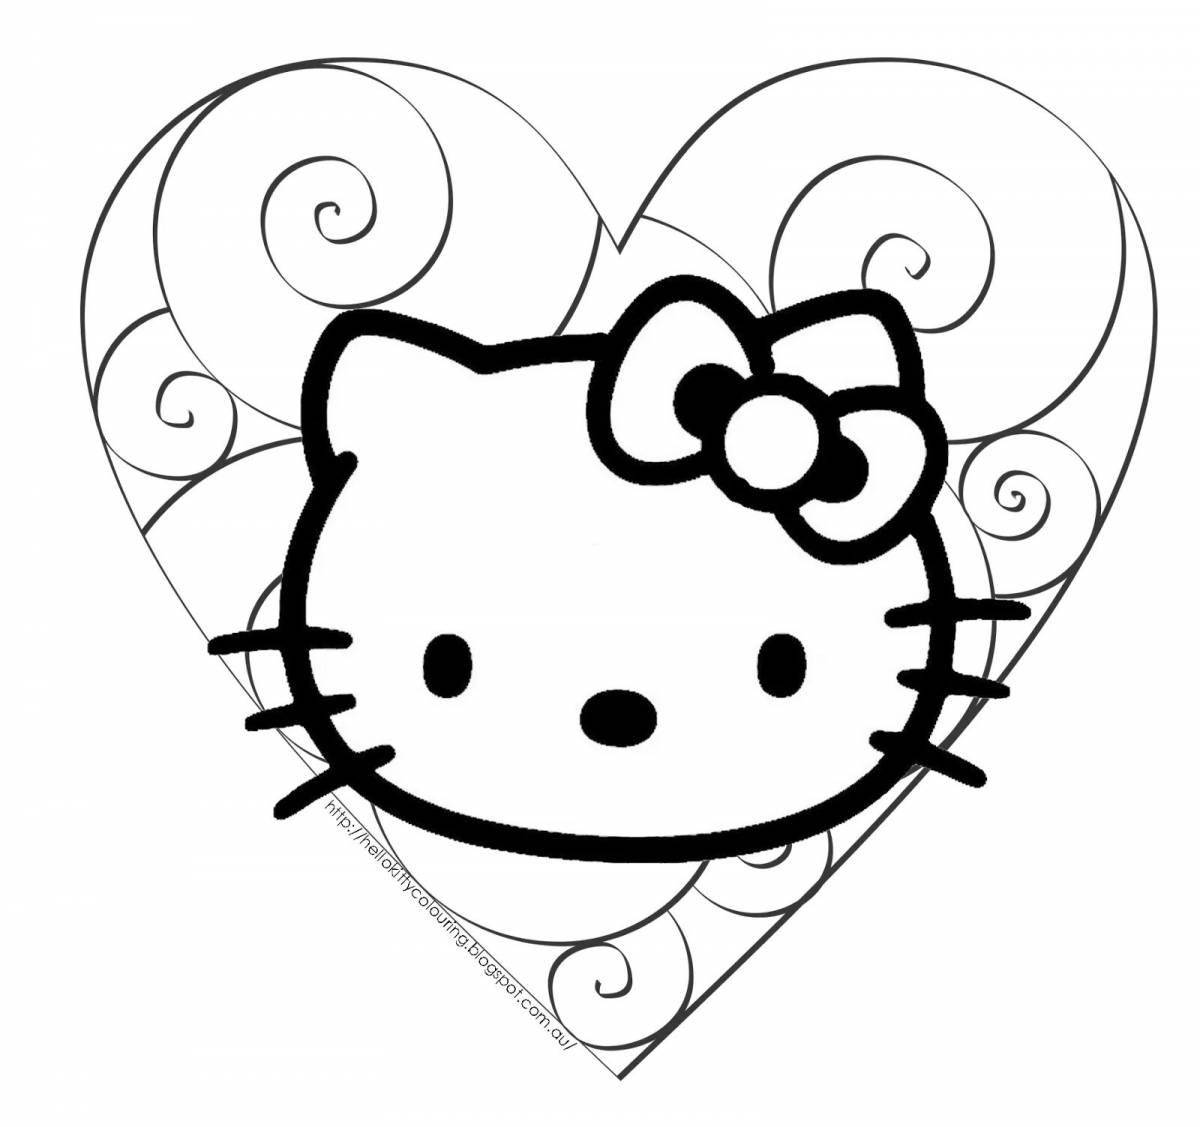 Colorful coloring hello kitty black